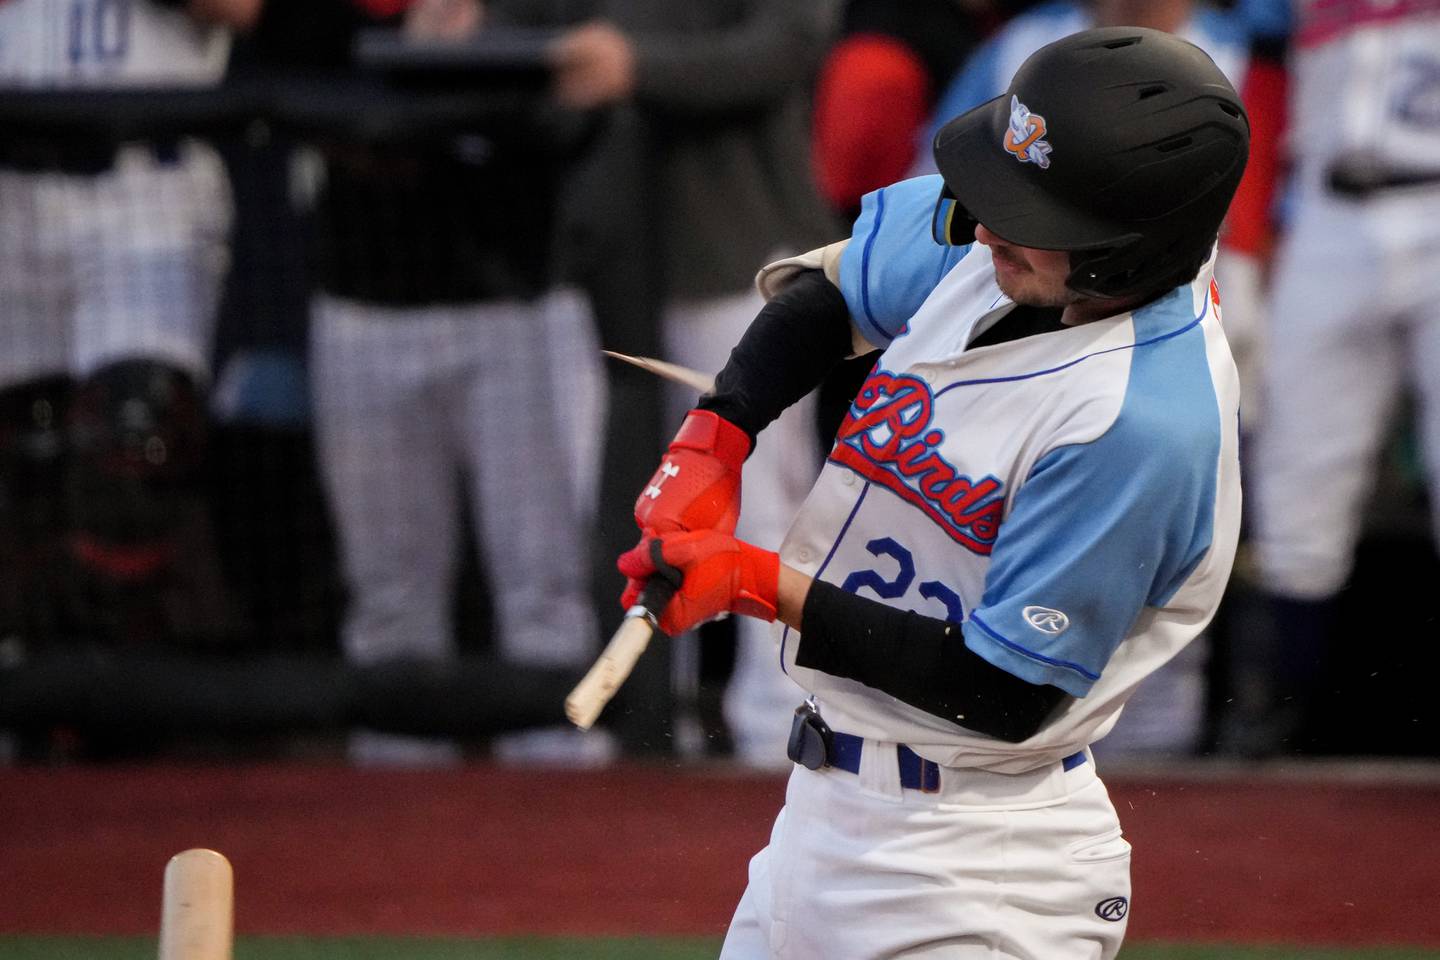 Aberdeen IronBirds outfielder Dylan Beavers (23) breaks his bat while swinging at a pitch in a game against the Hudson Valley Renegades at Leidos Field at Ripken Stadium on Tuesday, May 9. This game against the Renegades was Jackson Holliday’s home debut for the IronBirds.